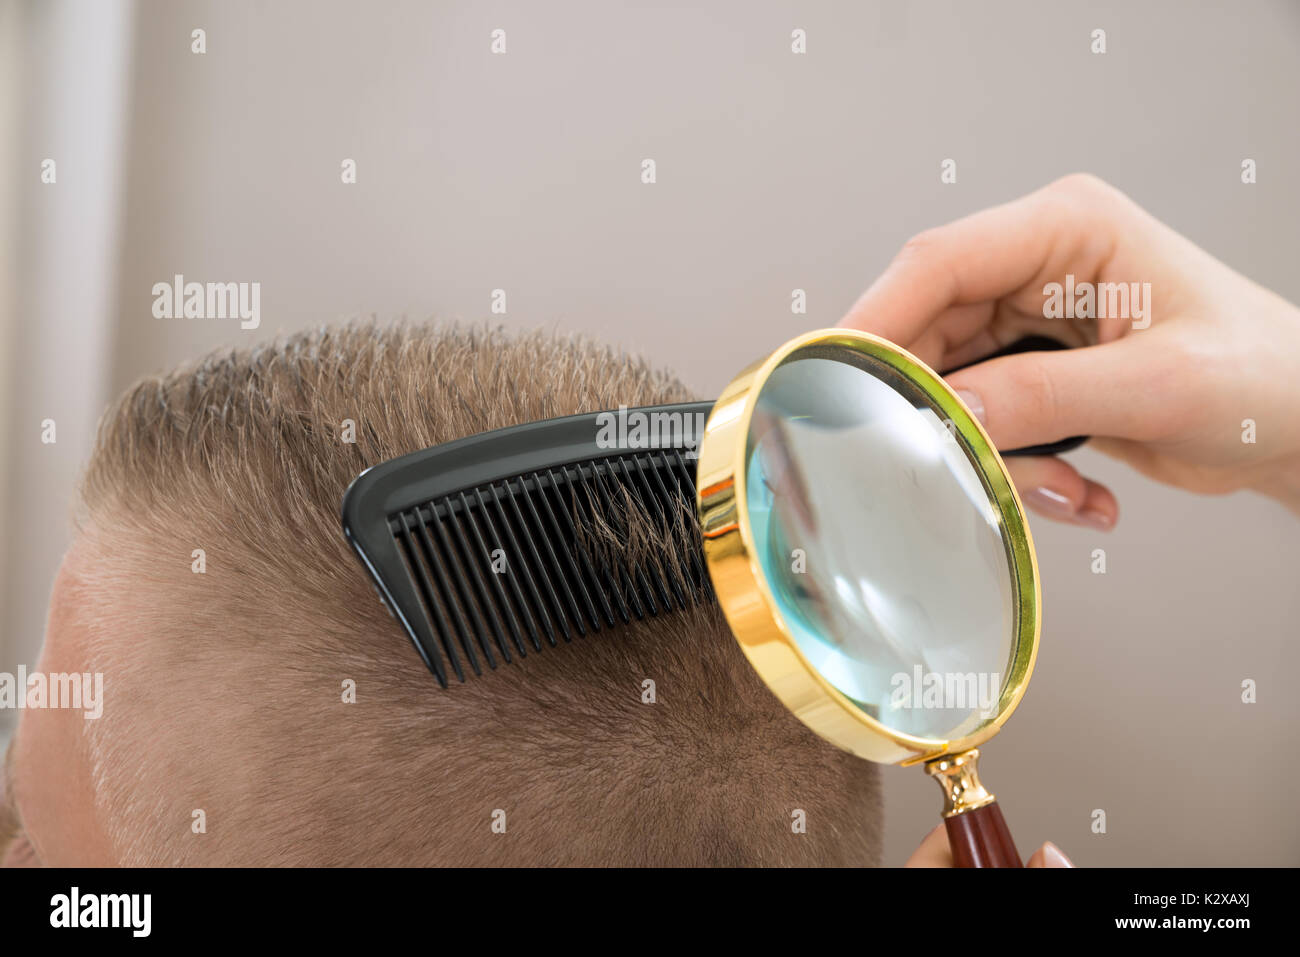 Close-up Dermatologist Looking At Patient's Hair Through Magnifying Glass Stock Photo